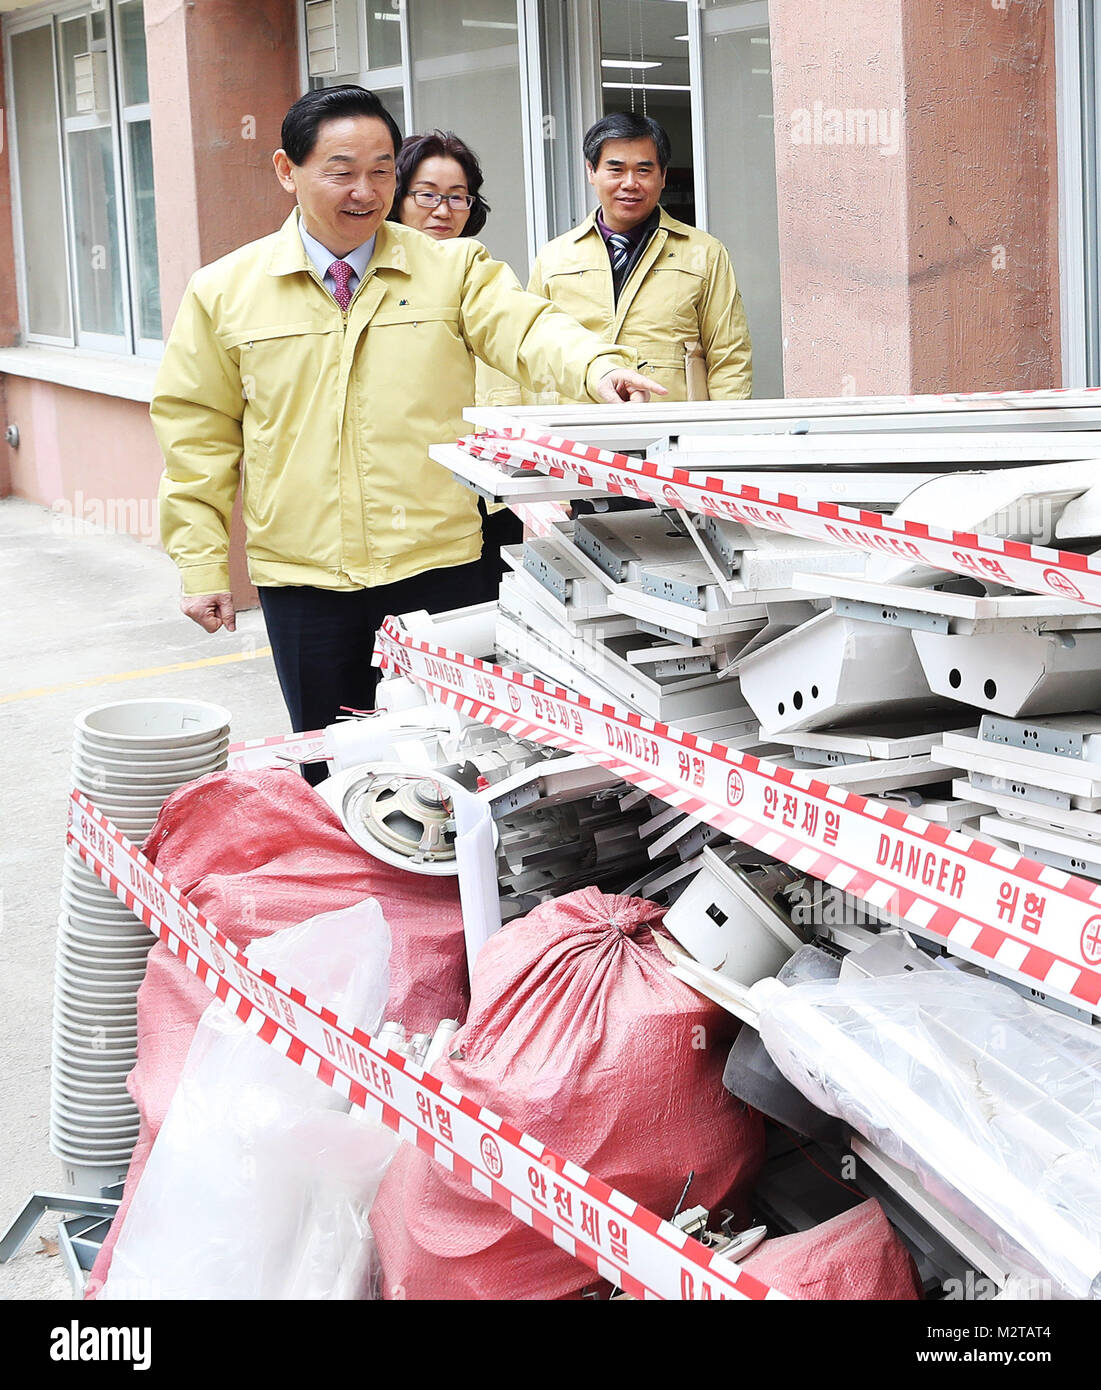 09th Feb, 2018. Education minister inspects removal of asbestos at school Education Minister Kim Sang-gon (C) views asbestos construction materials while visiting an elementary school in the city of Suwon, just south of Seoul, on Feb. 9, 2018, to inspect the school's removal of building materials that use asbestos. All forms of asbestos, a mineral fiber used in a variety of building materials, are known to be carcinogenic. Credit: Yonhap/Newcom/Alamy Live News Stock Photo